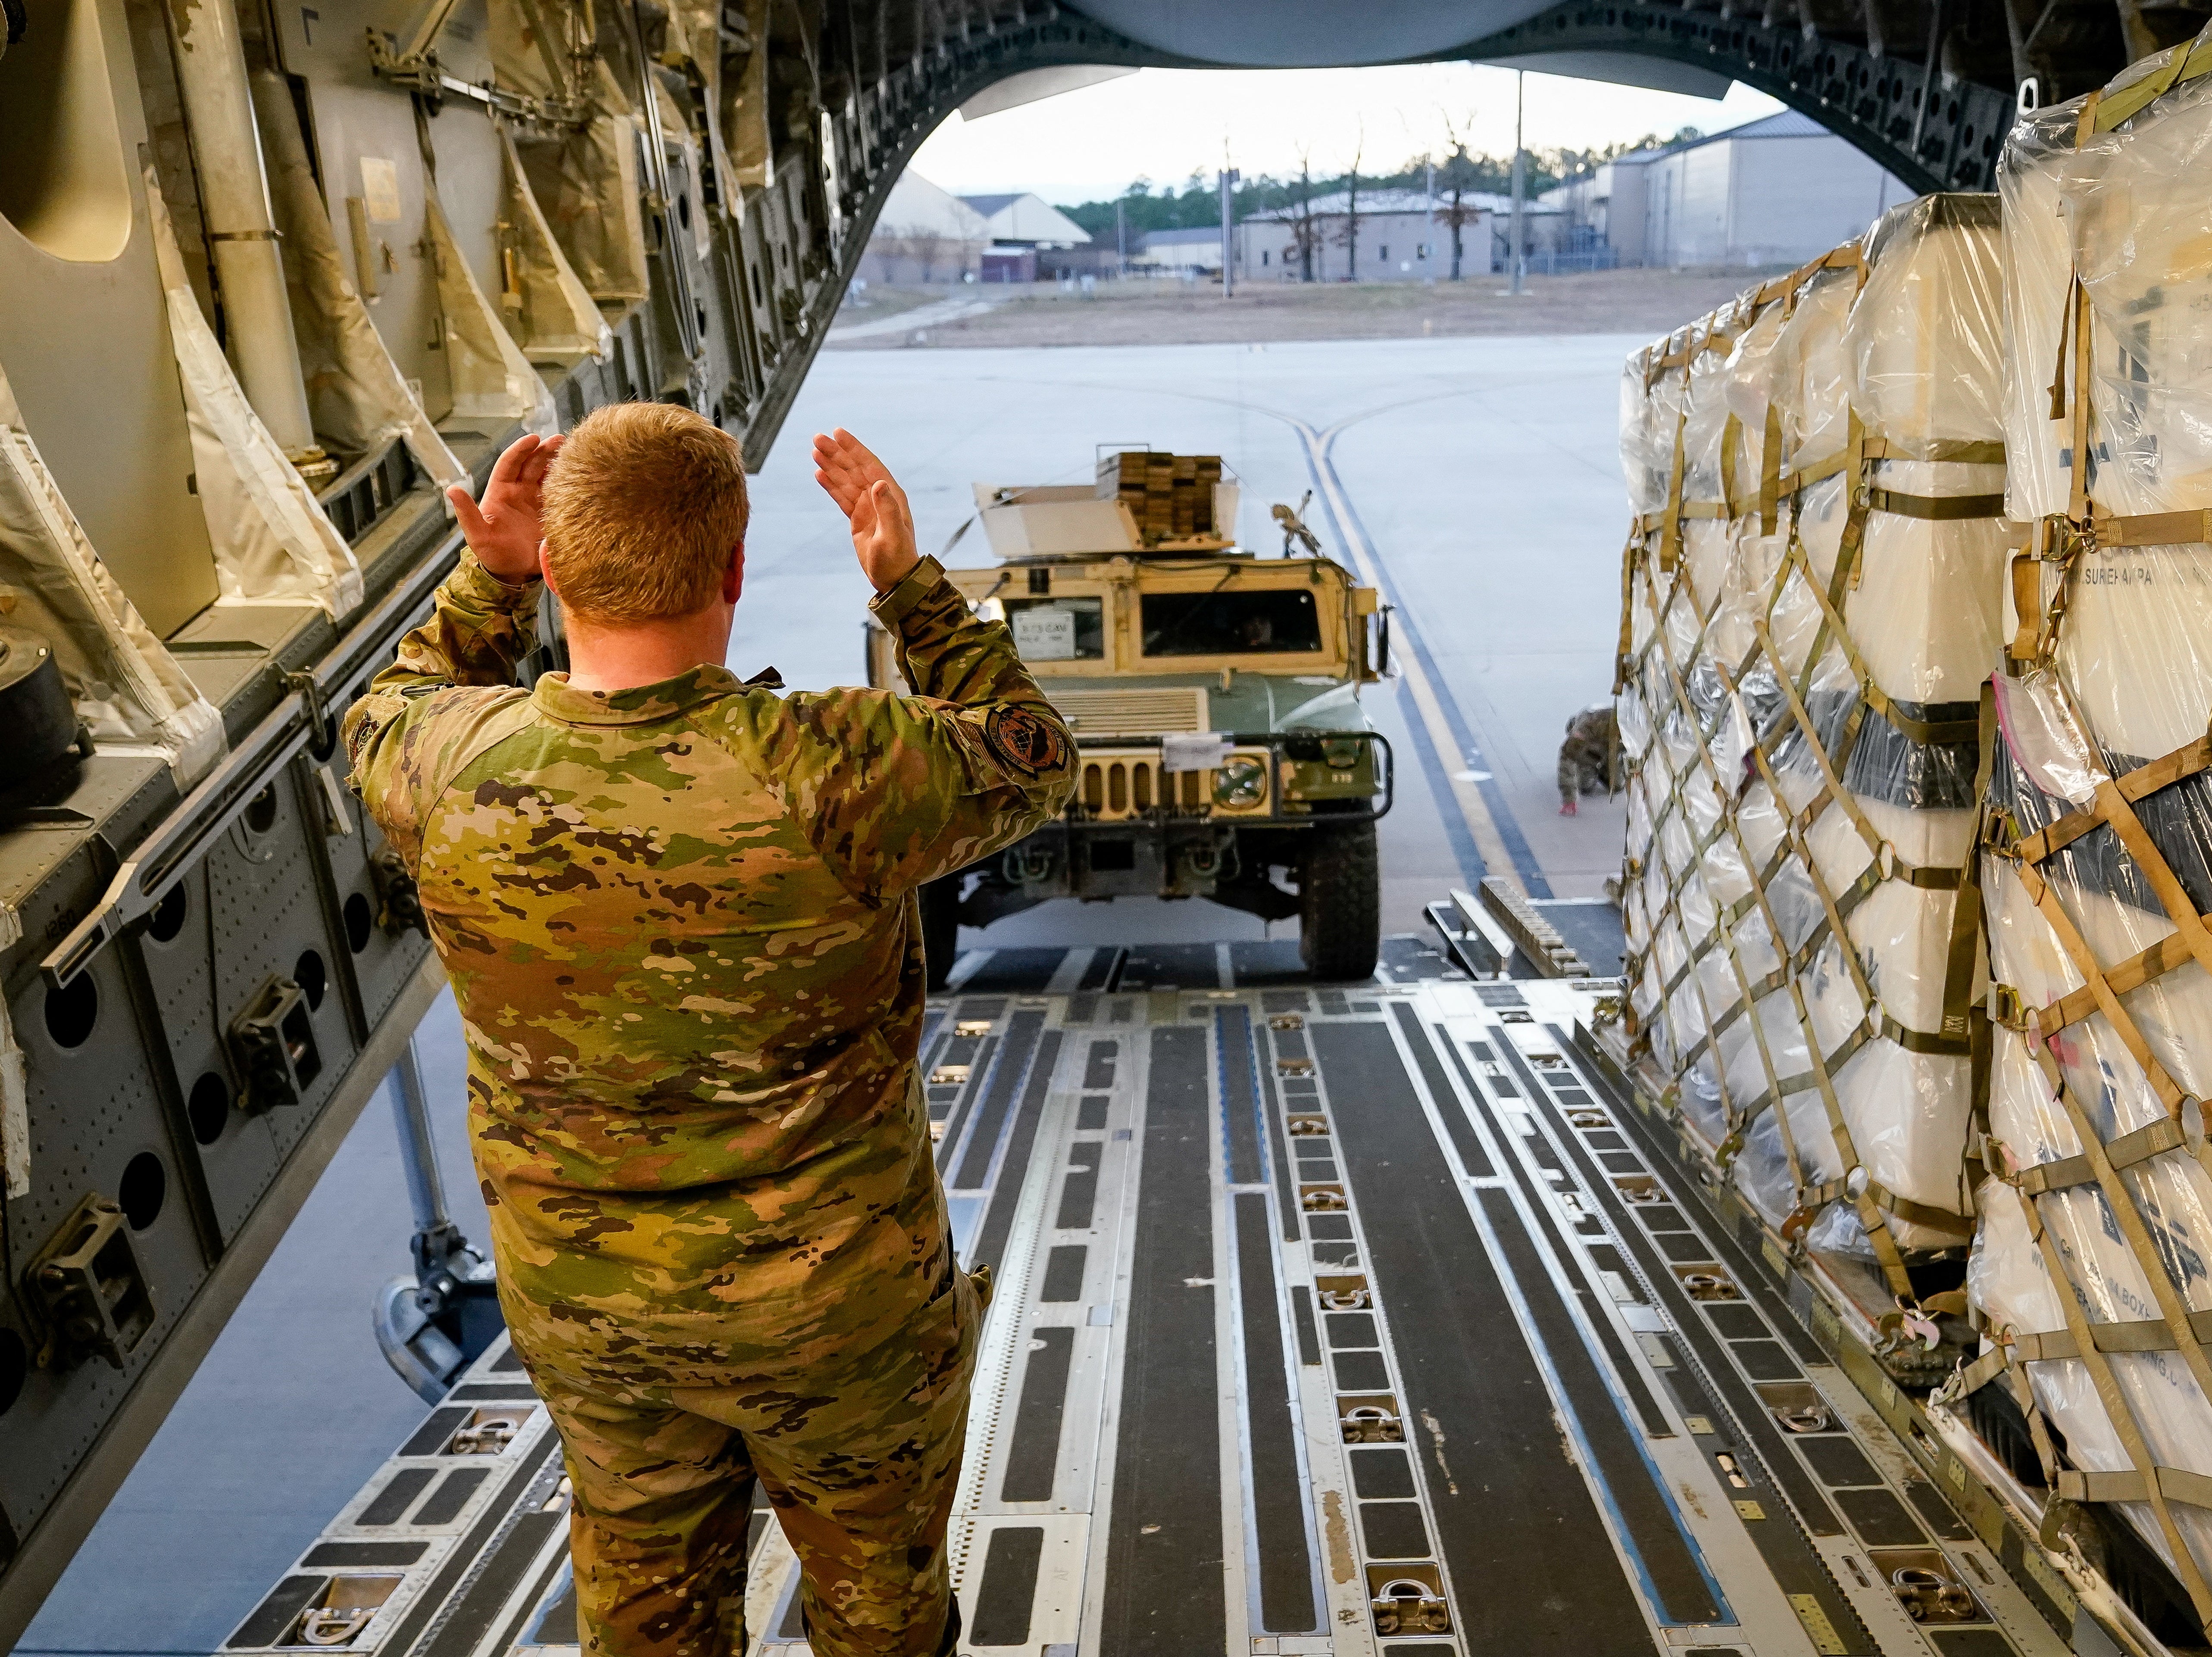 It comes as US troops arrived in Poland on Sunday